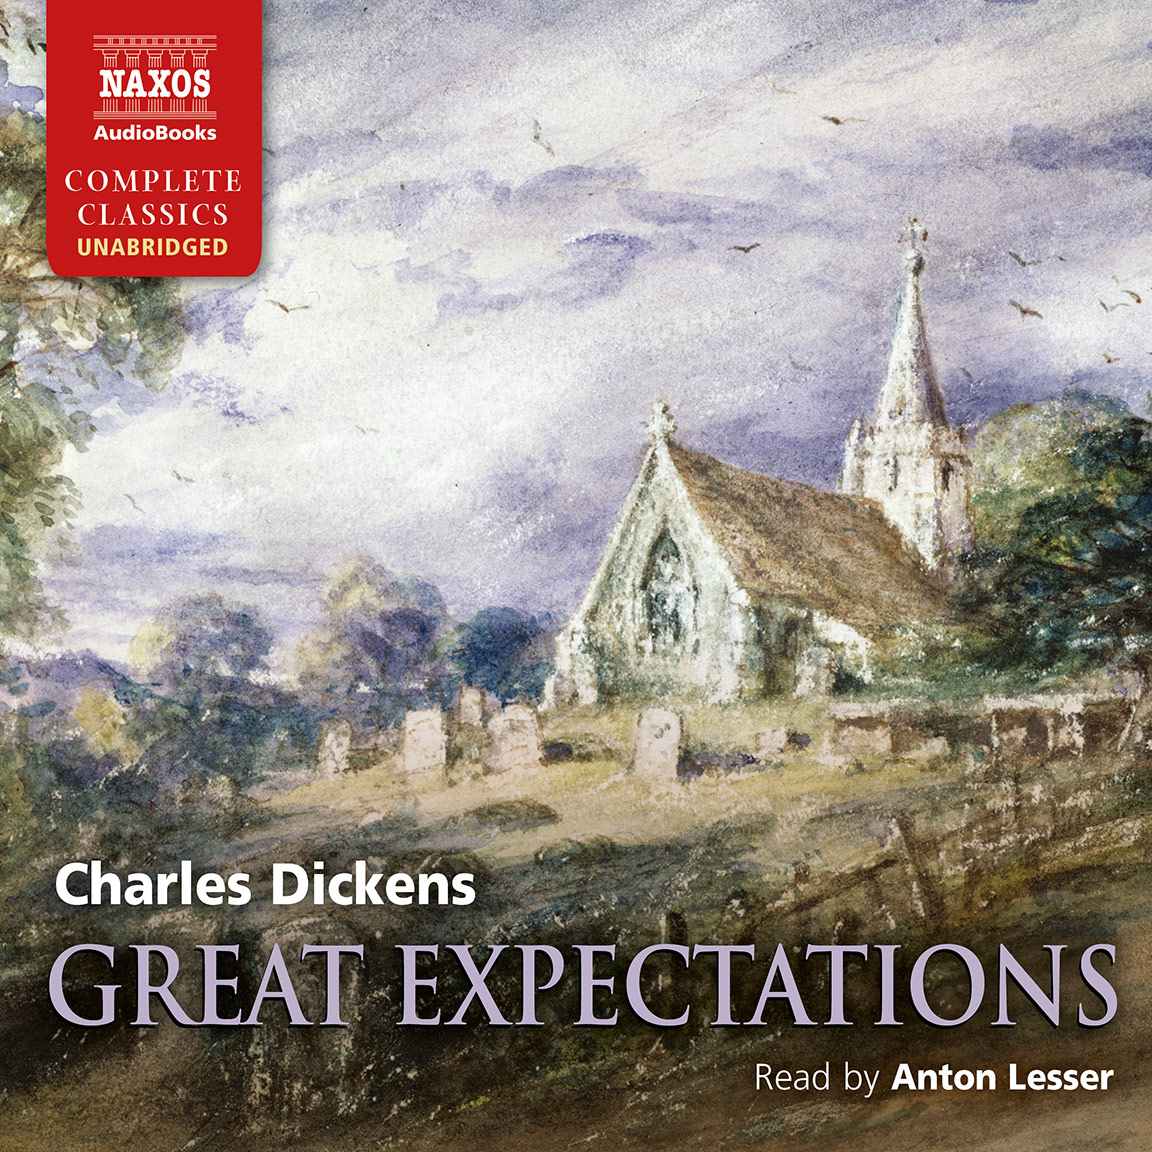 Dickens great expectations charles Charles Dickens: